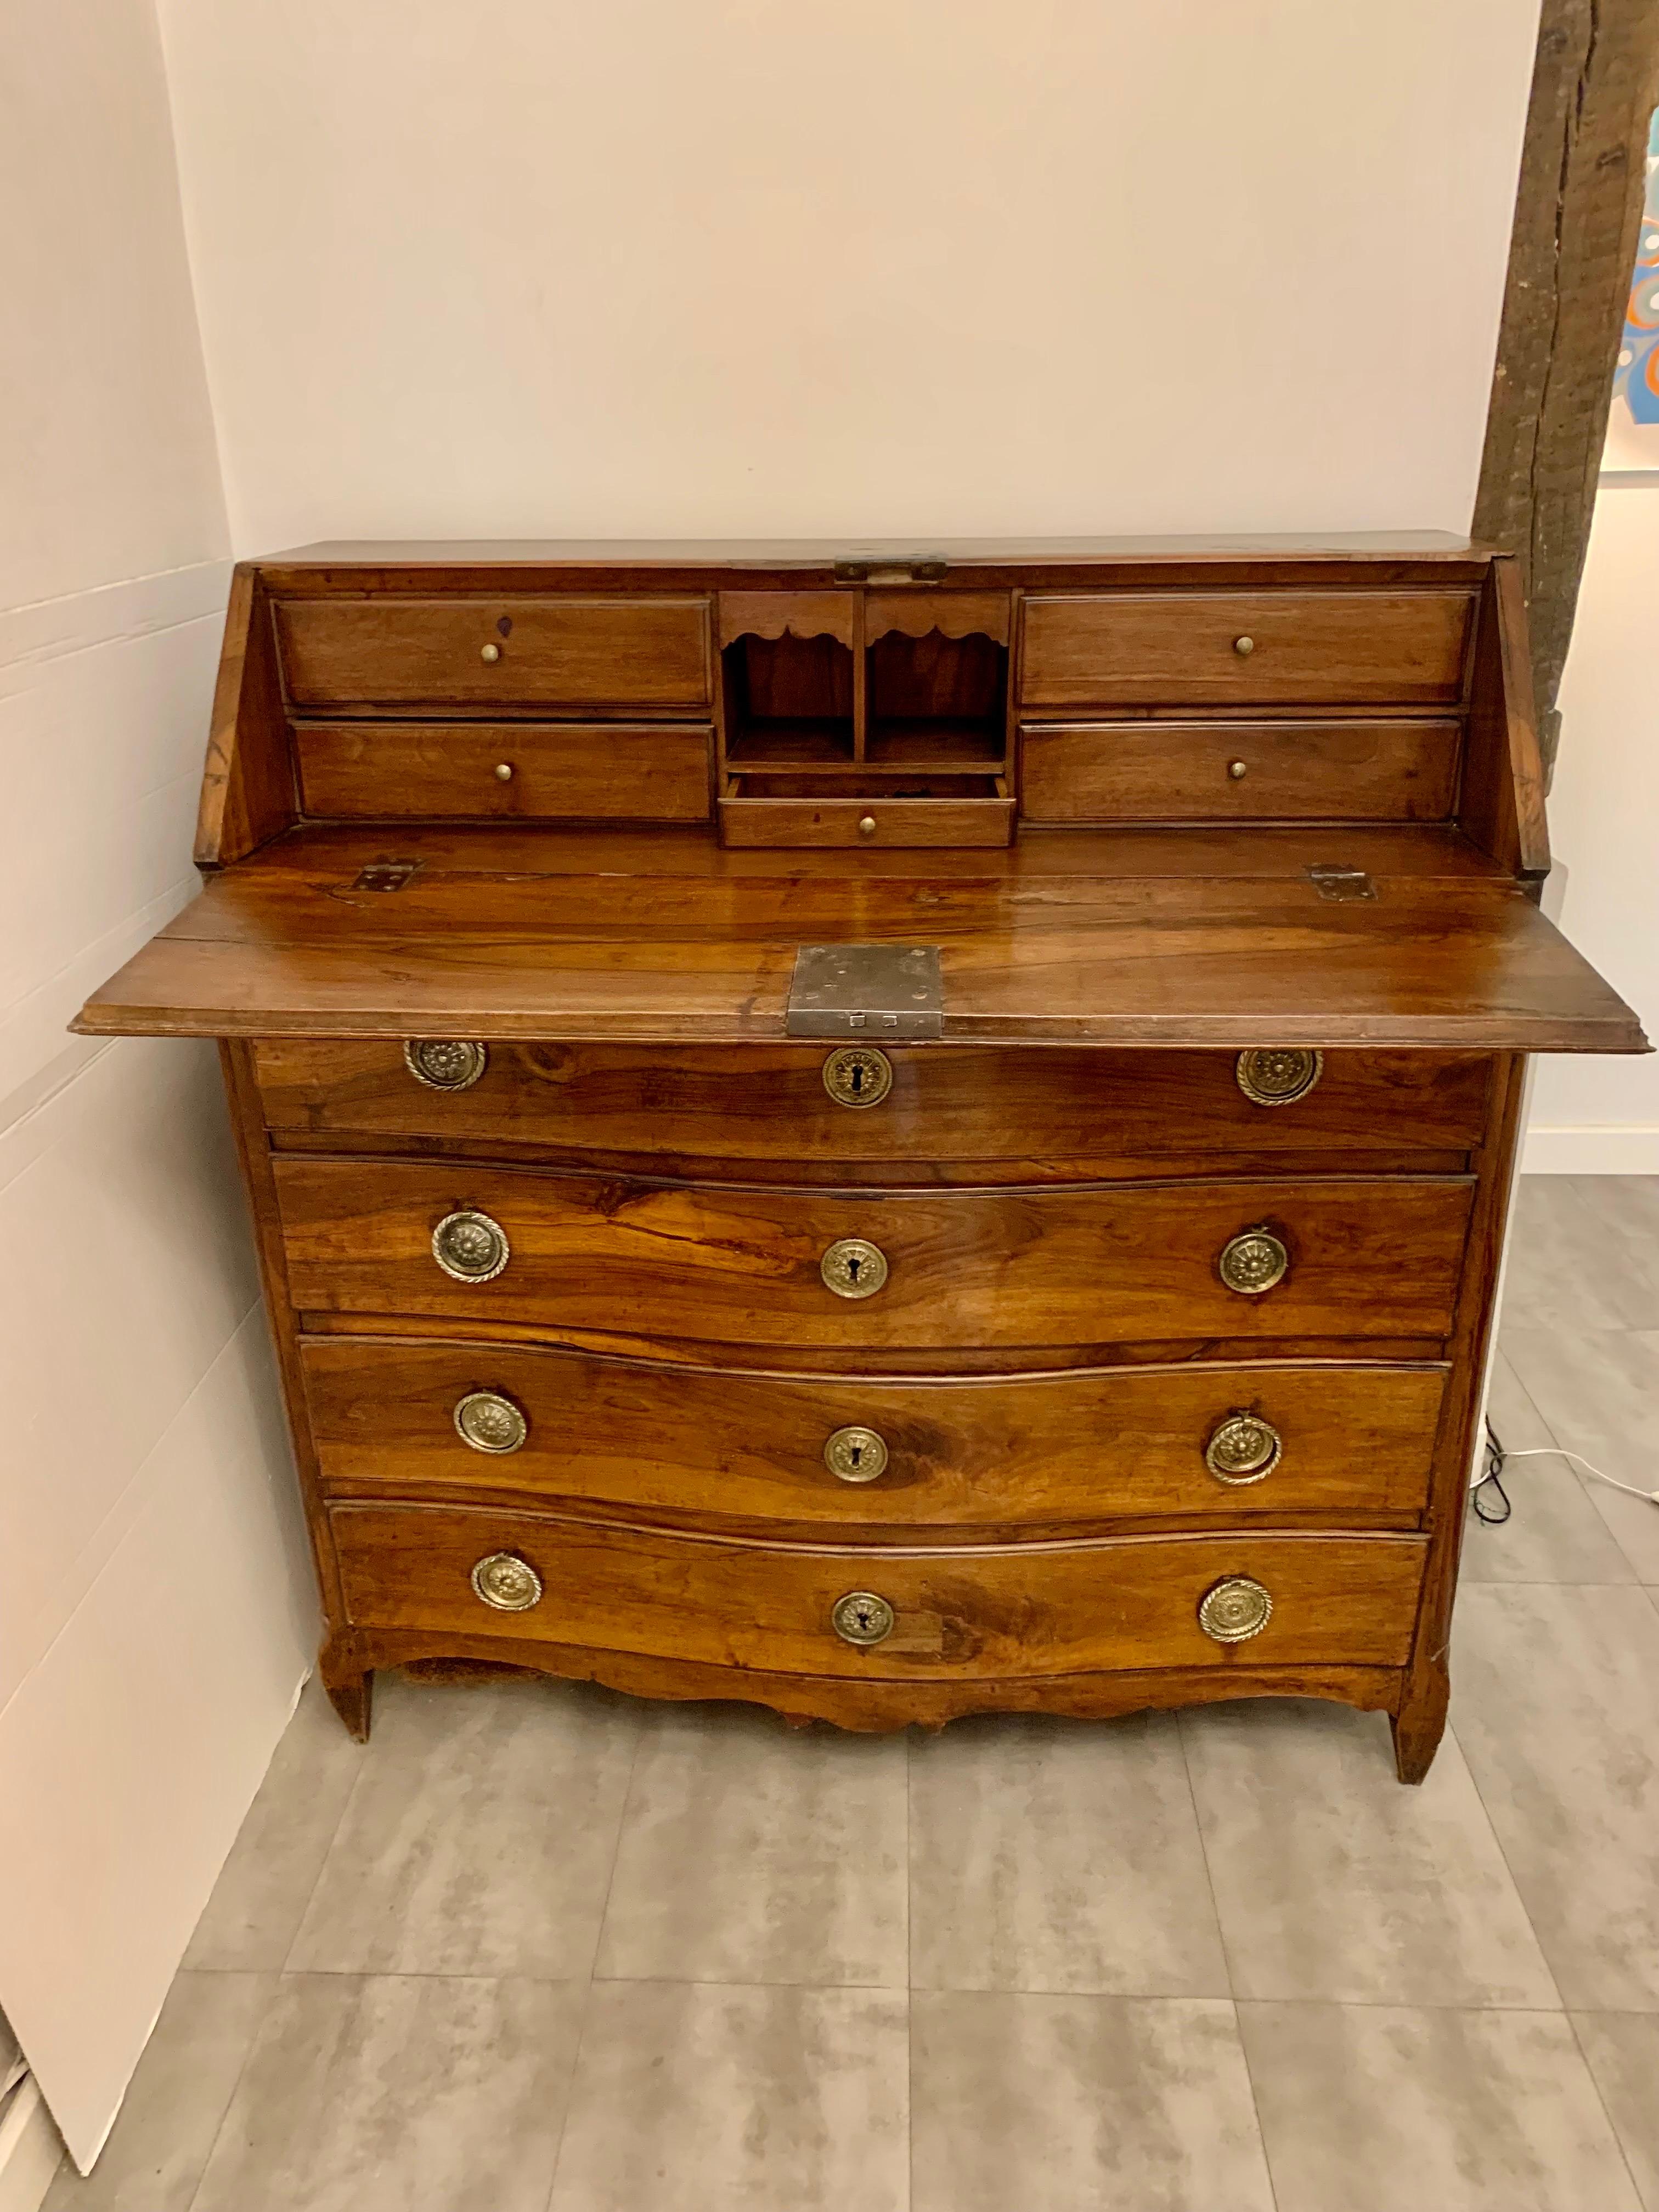 This is a beautiful Spanish desk from the 18th century, Carlos III era. Made of walnut wood in complete pieces of wood, both on the sides, drawer fronts and lid with a hidden 